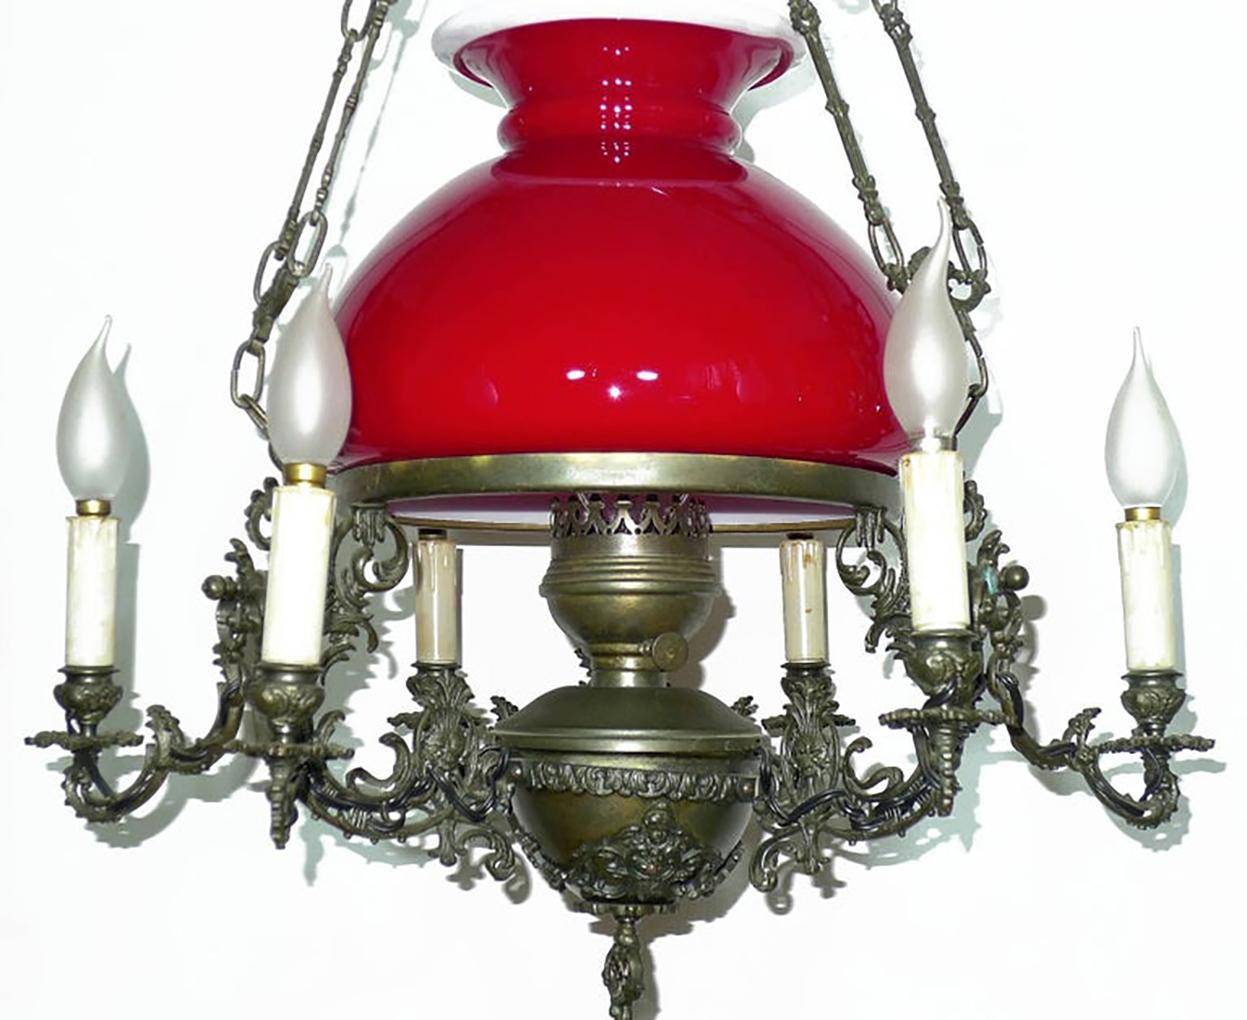 Beautiful antique 1950s large French Victorian seven-light hanging oil lamp chandelier with ruby red Opaline glass shade/chiselled bronze 

Materials: Opaline glass/chiselled bronze/ brass
Measures:
Diameter 24 inches / 60 cm
Height 40 inches / 100